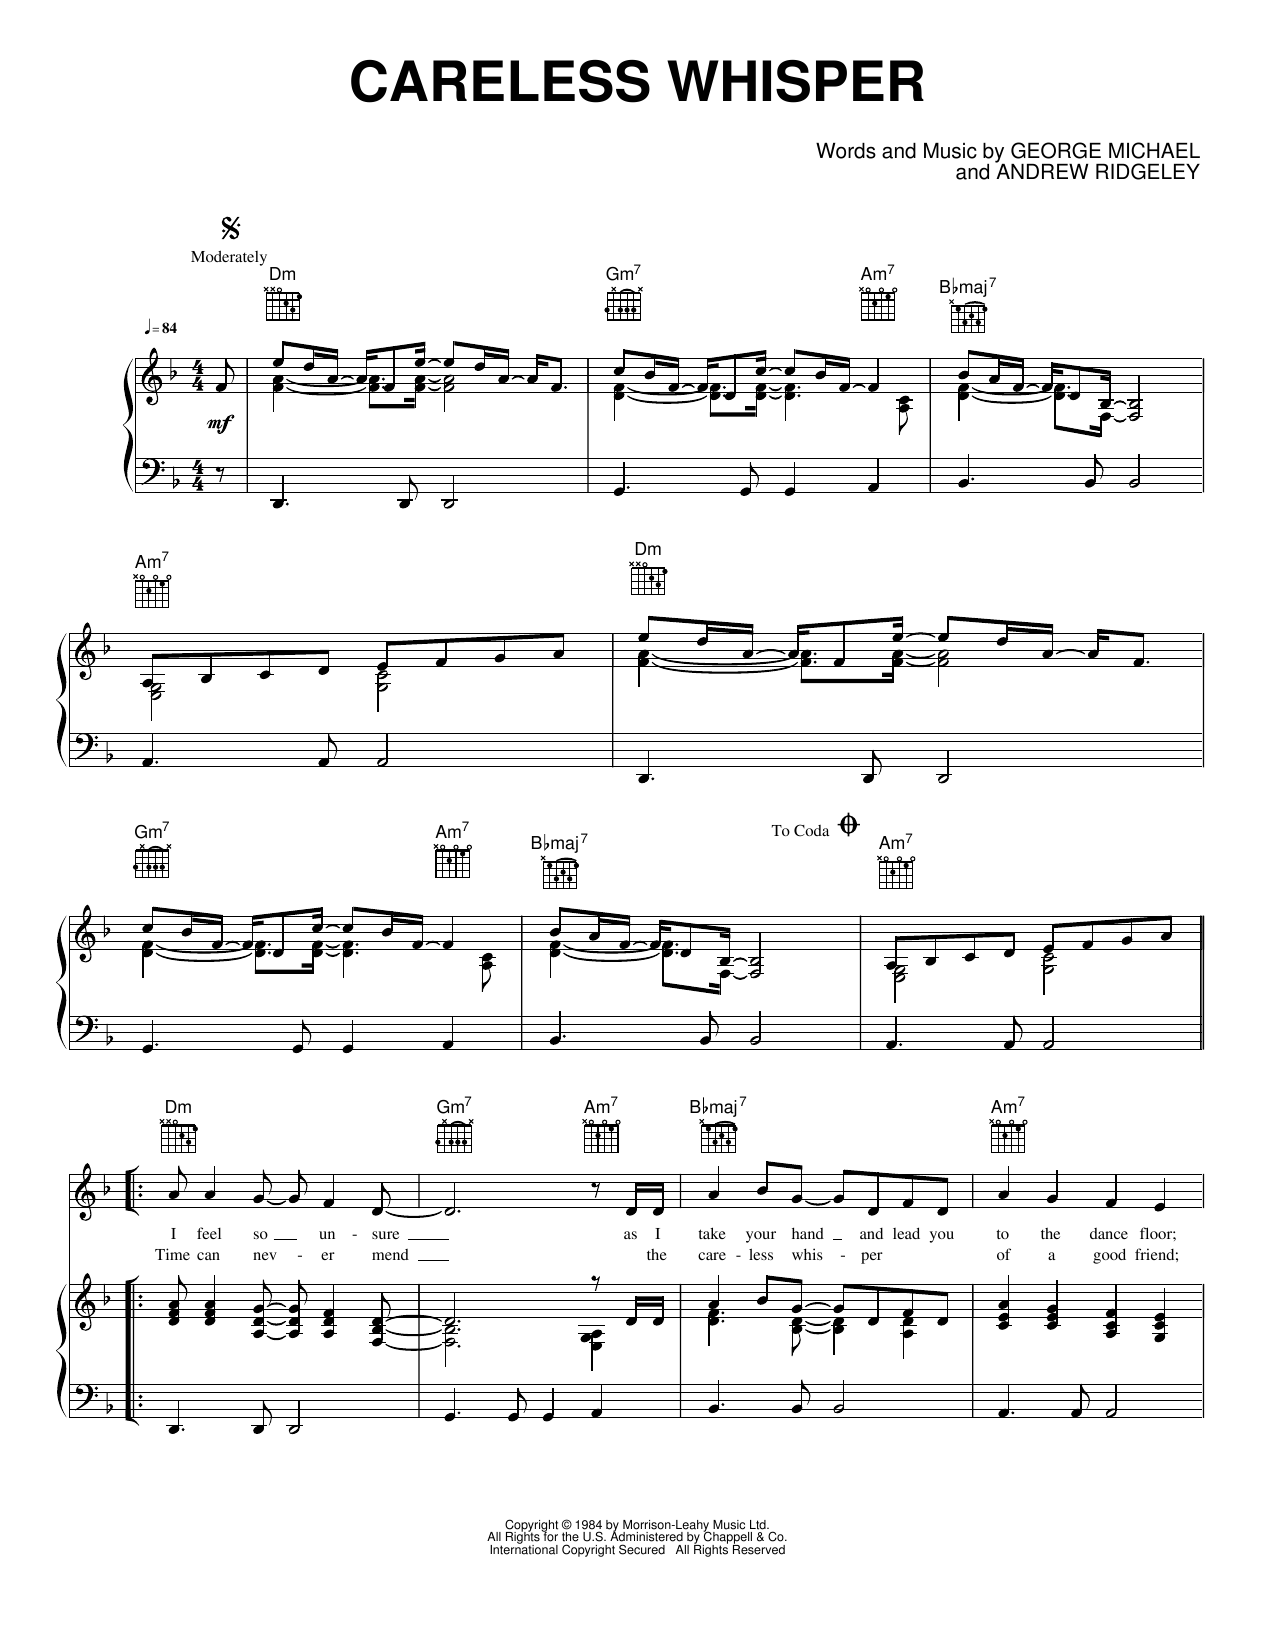 Careless Whisper Sheet Music Piano : Careless Whisper George Michael - Free careless whisper piano sheet music is provided for you.